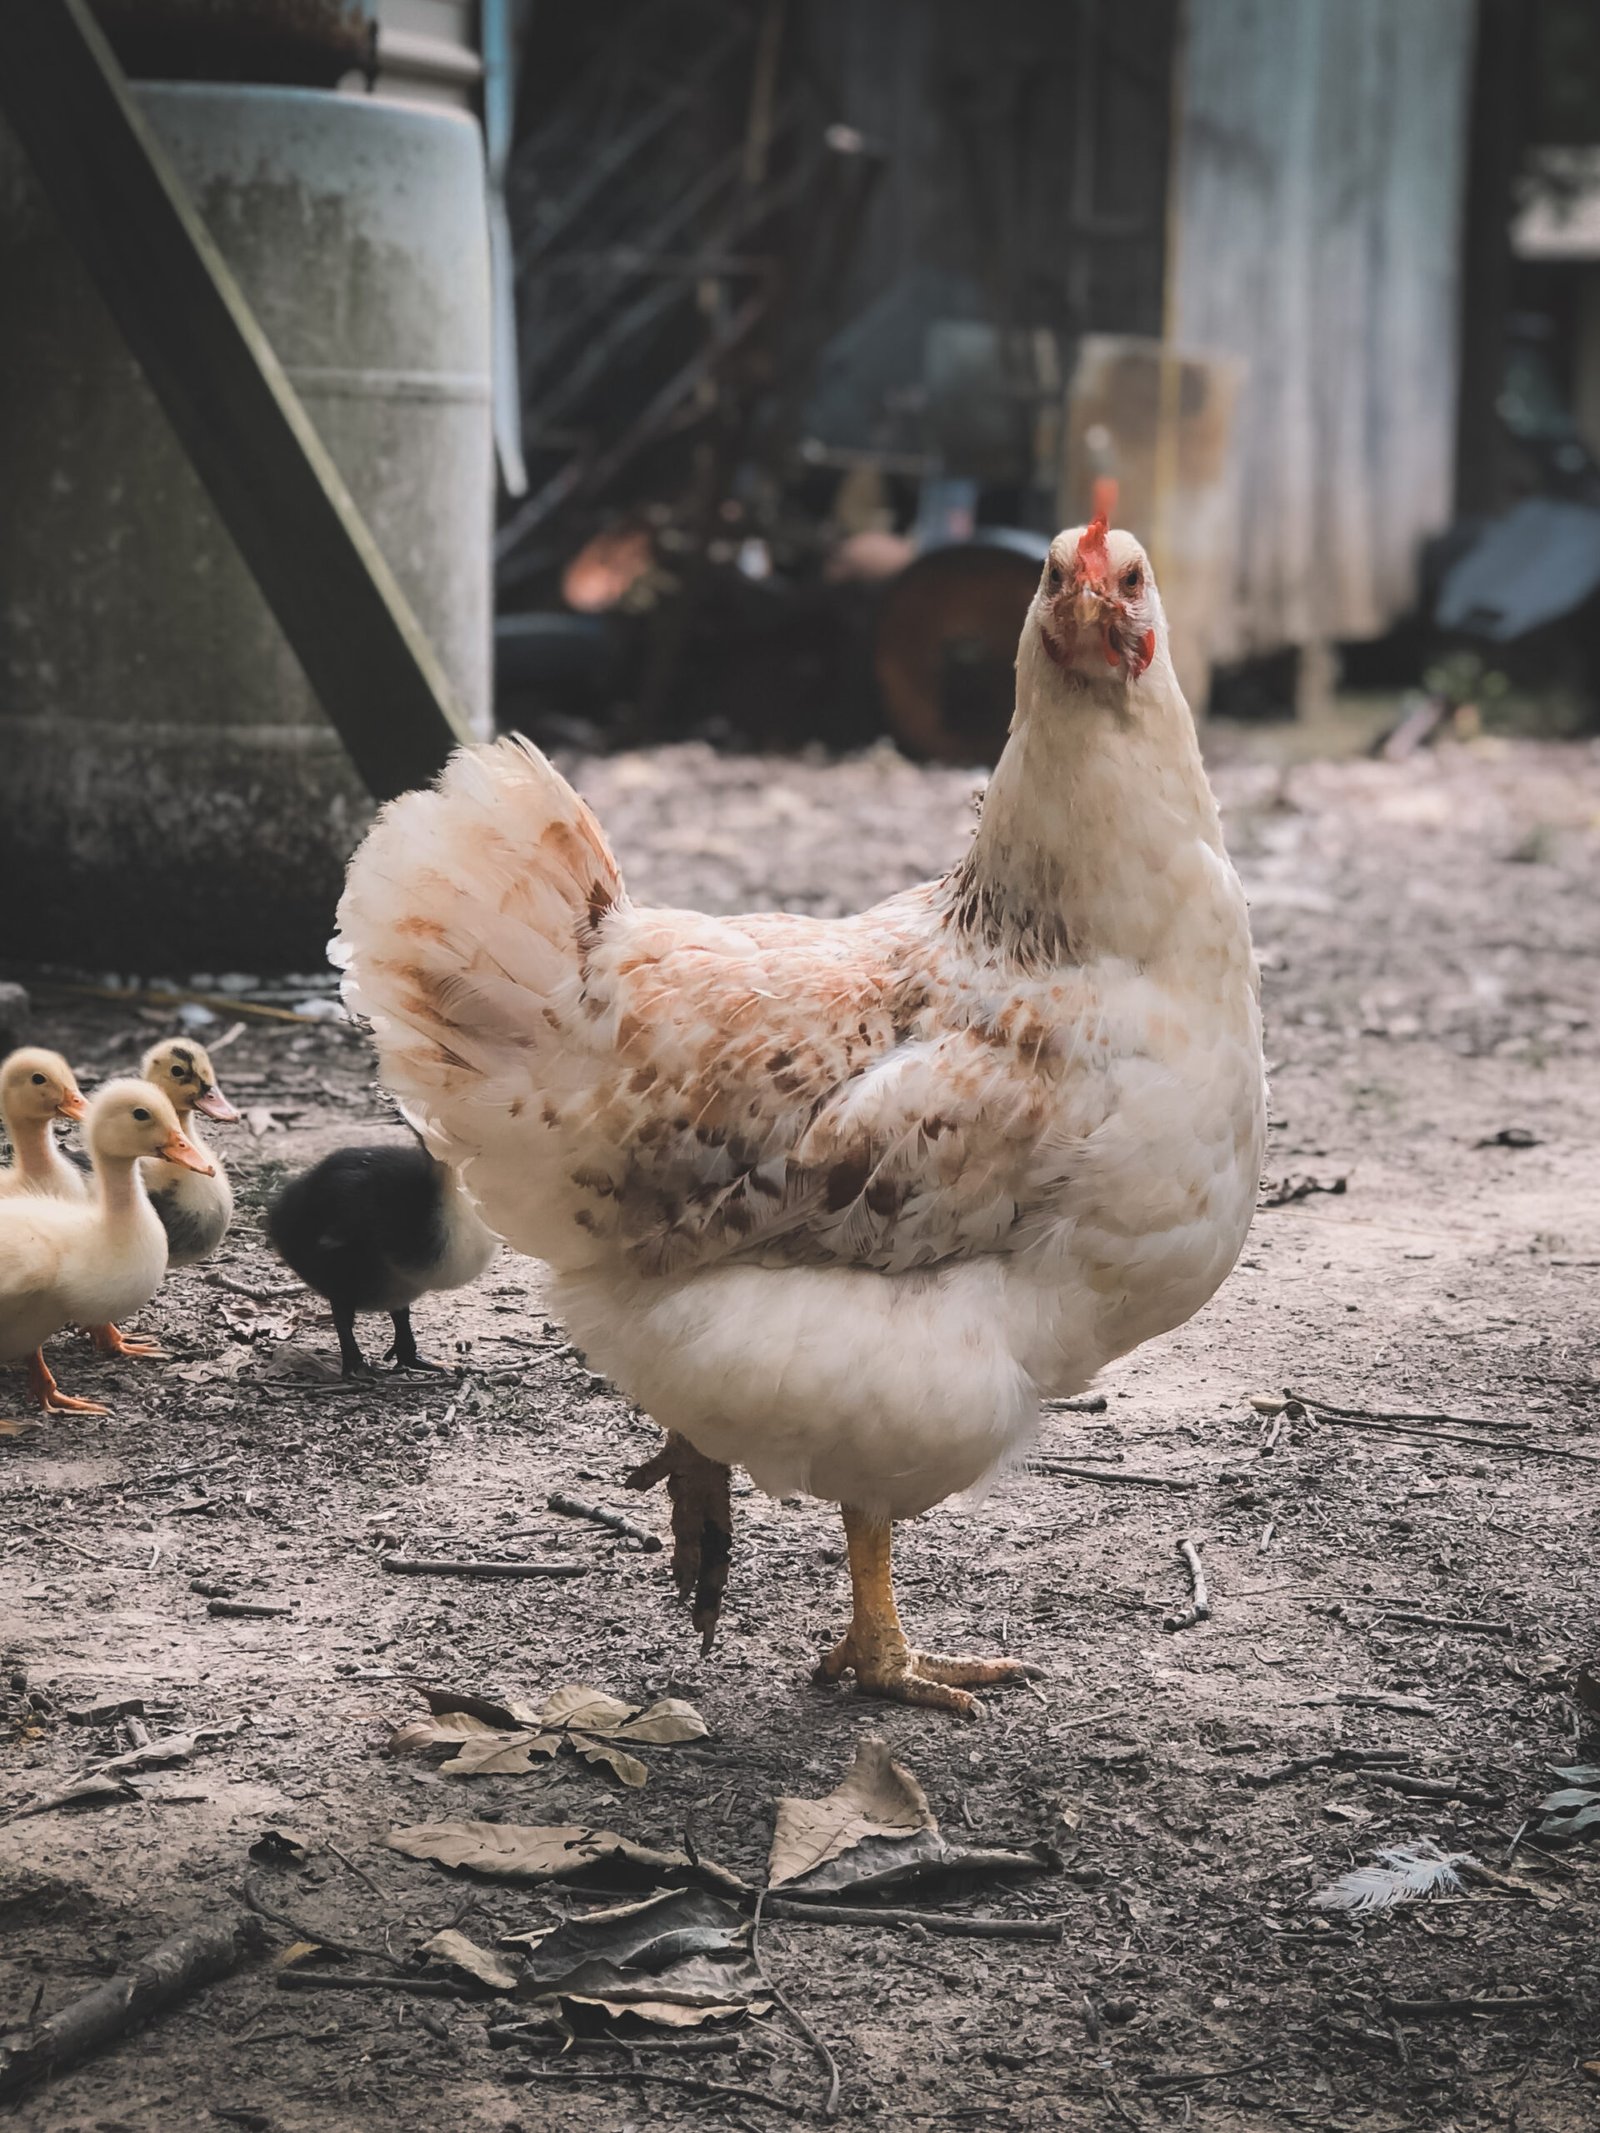 How Do You Encourage Natural Scratching And Digging Behaviors In Chickens?